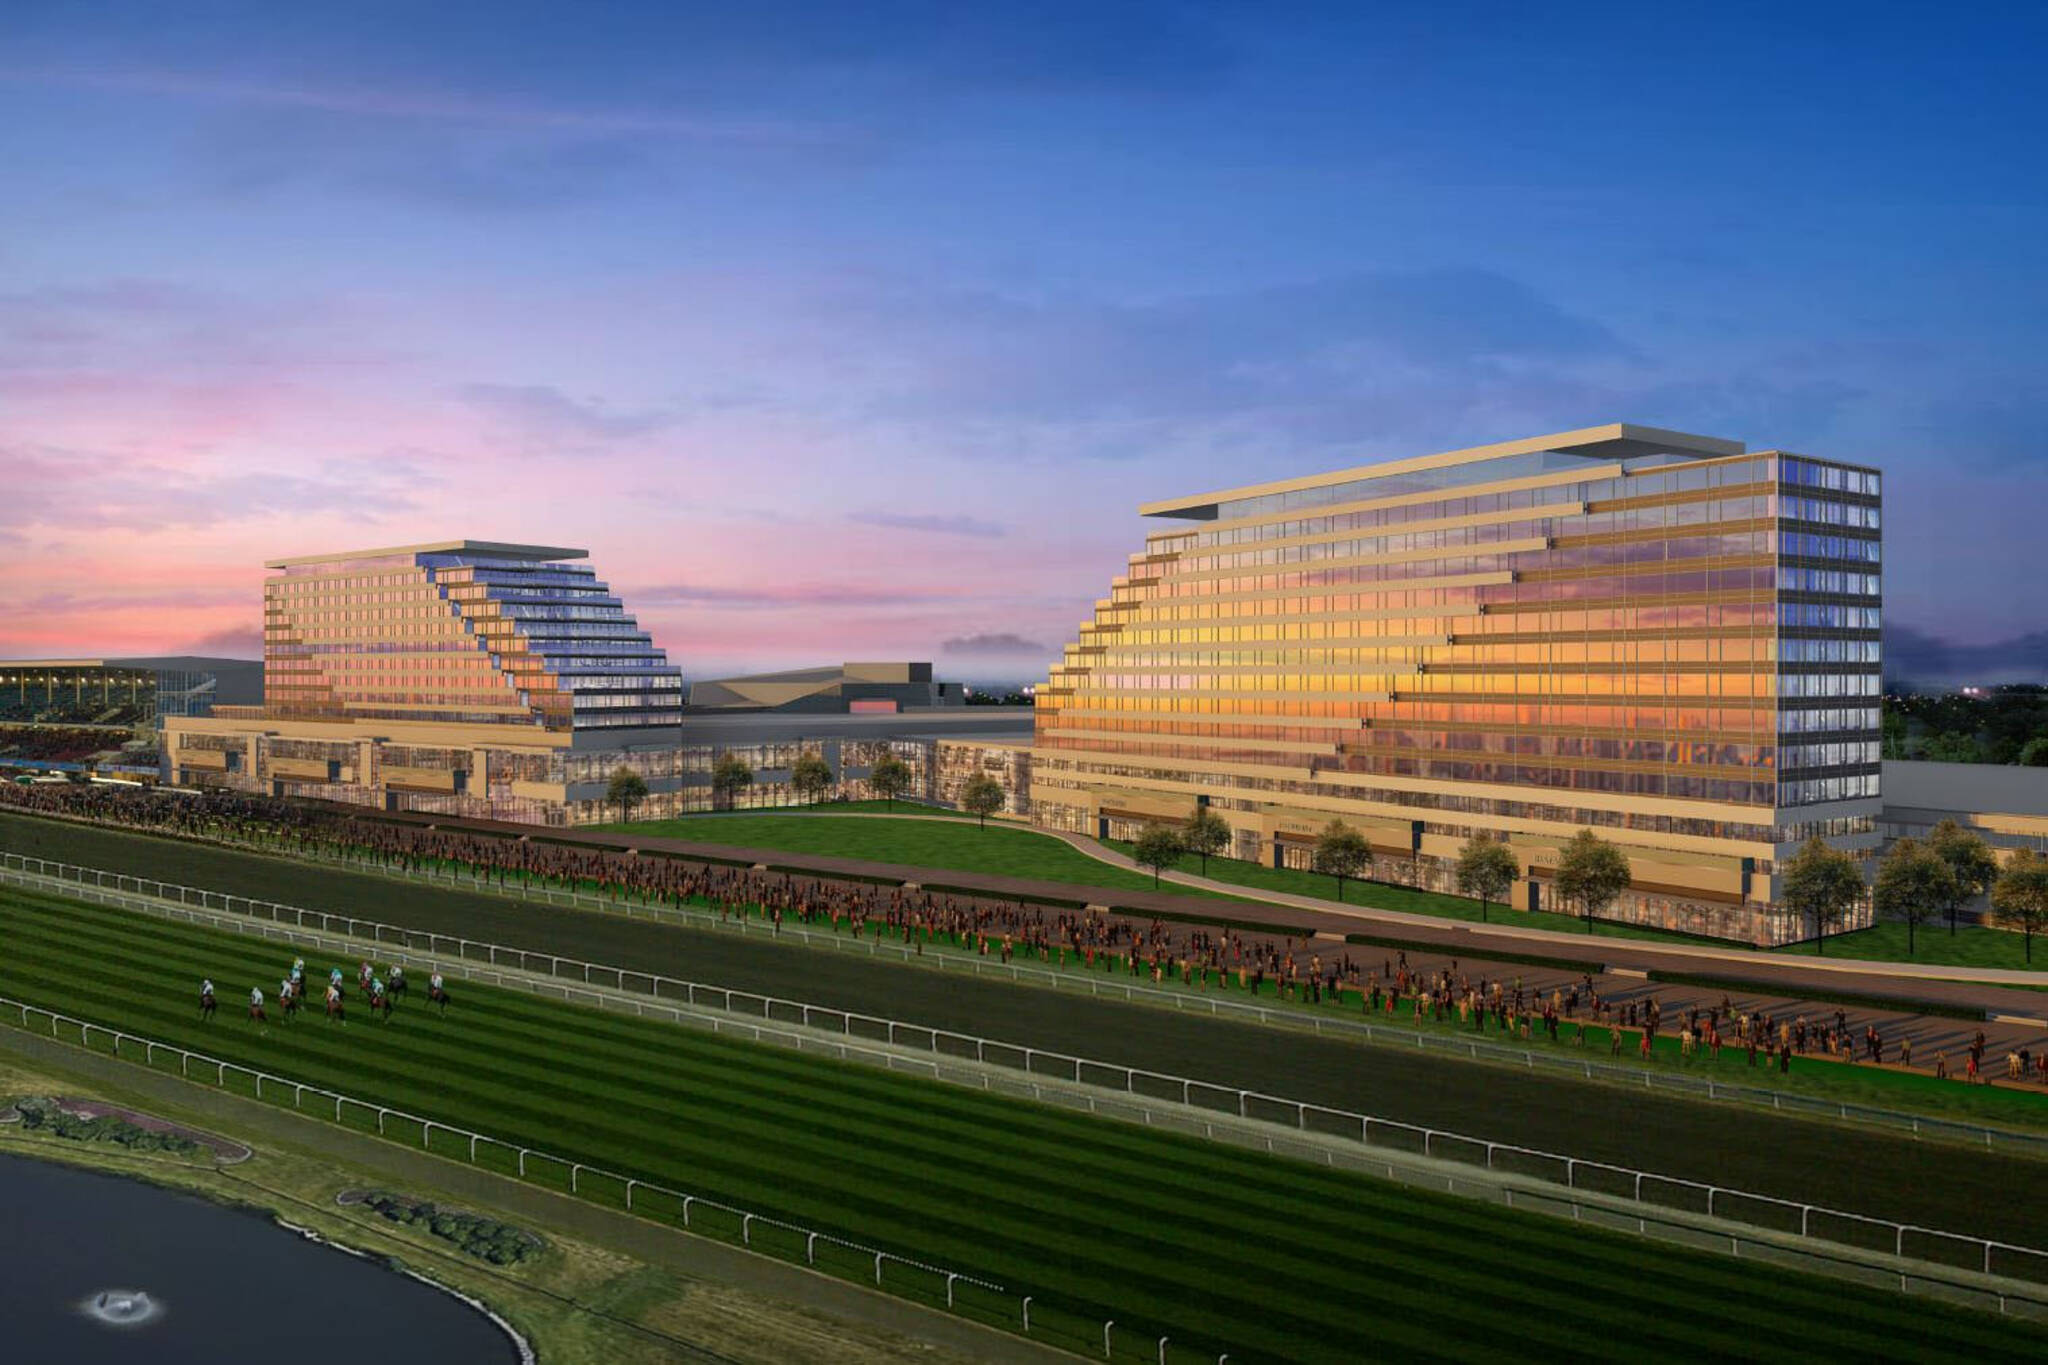 Woodbine casino expansion project